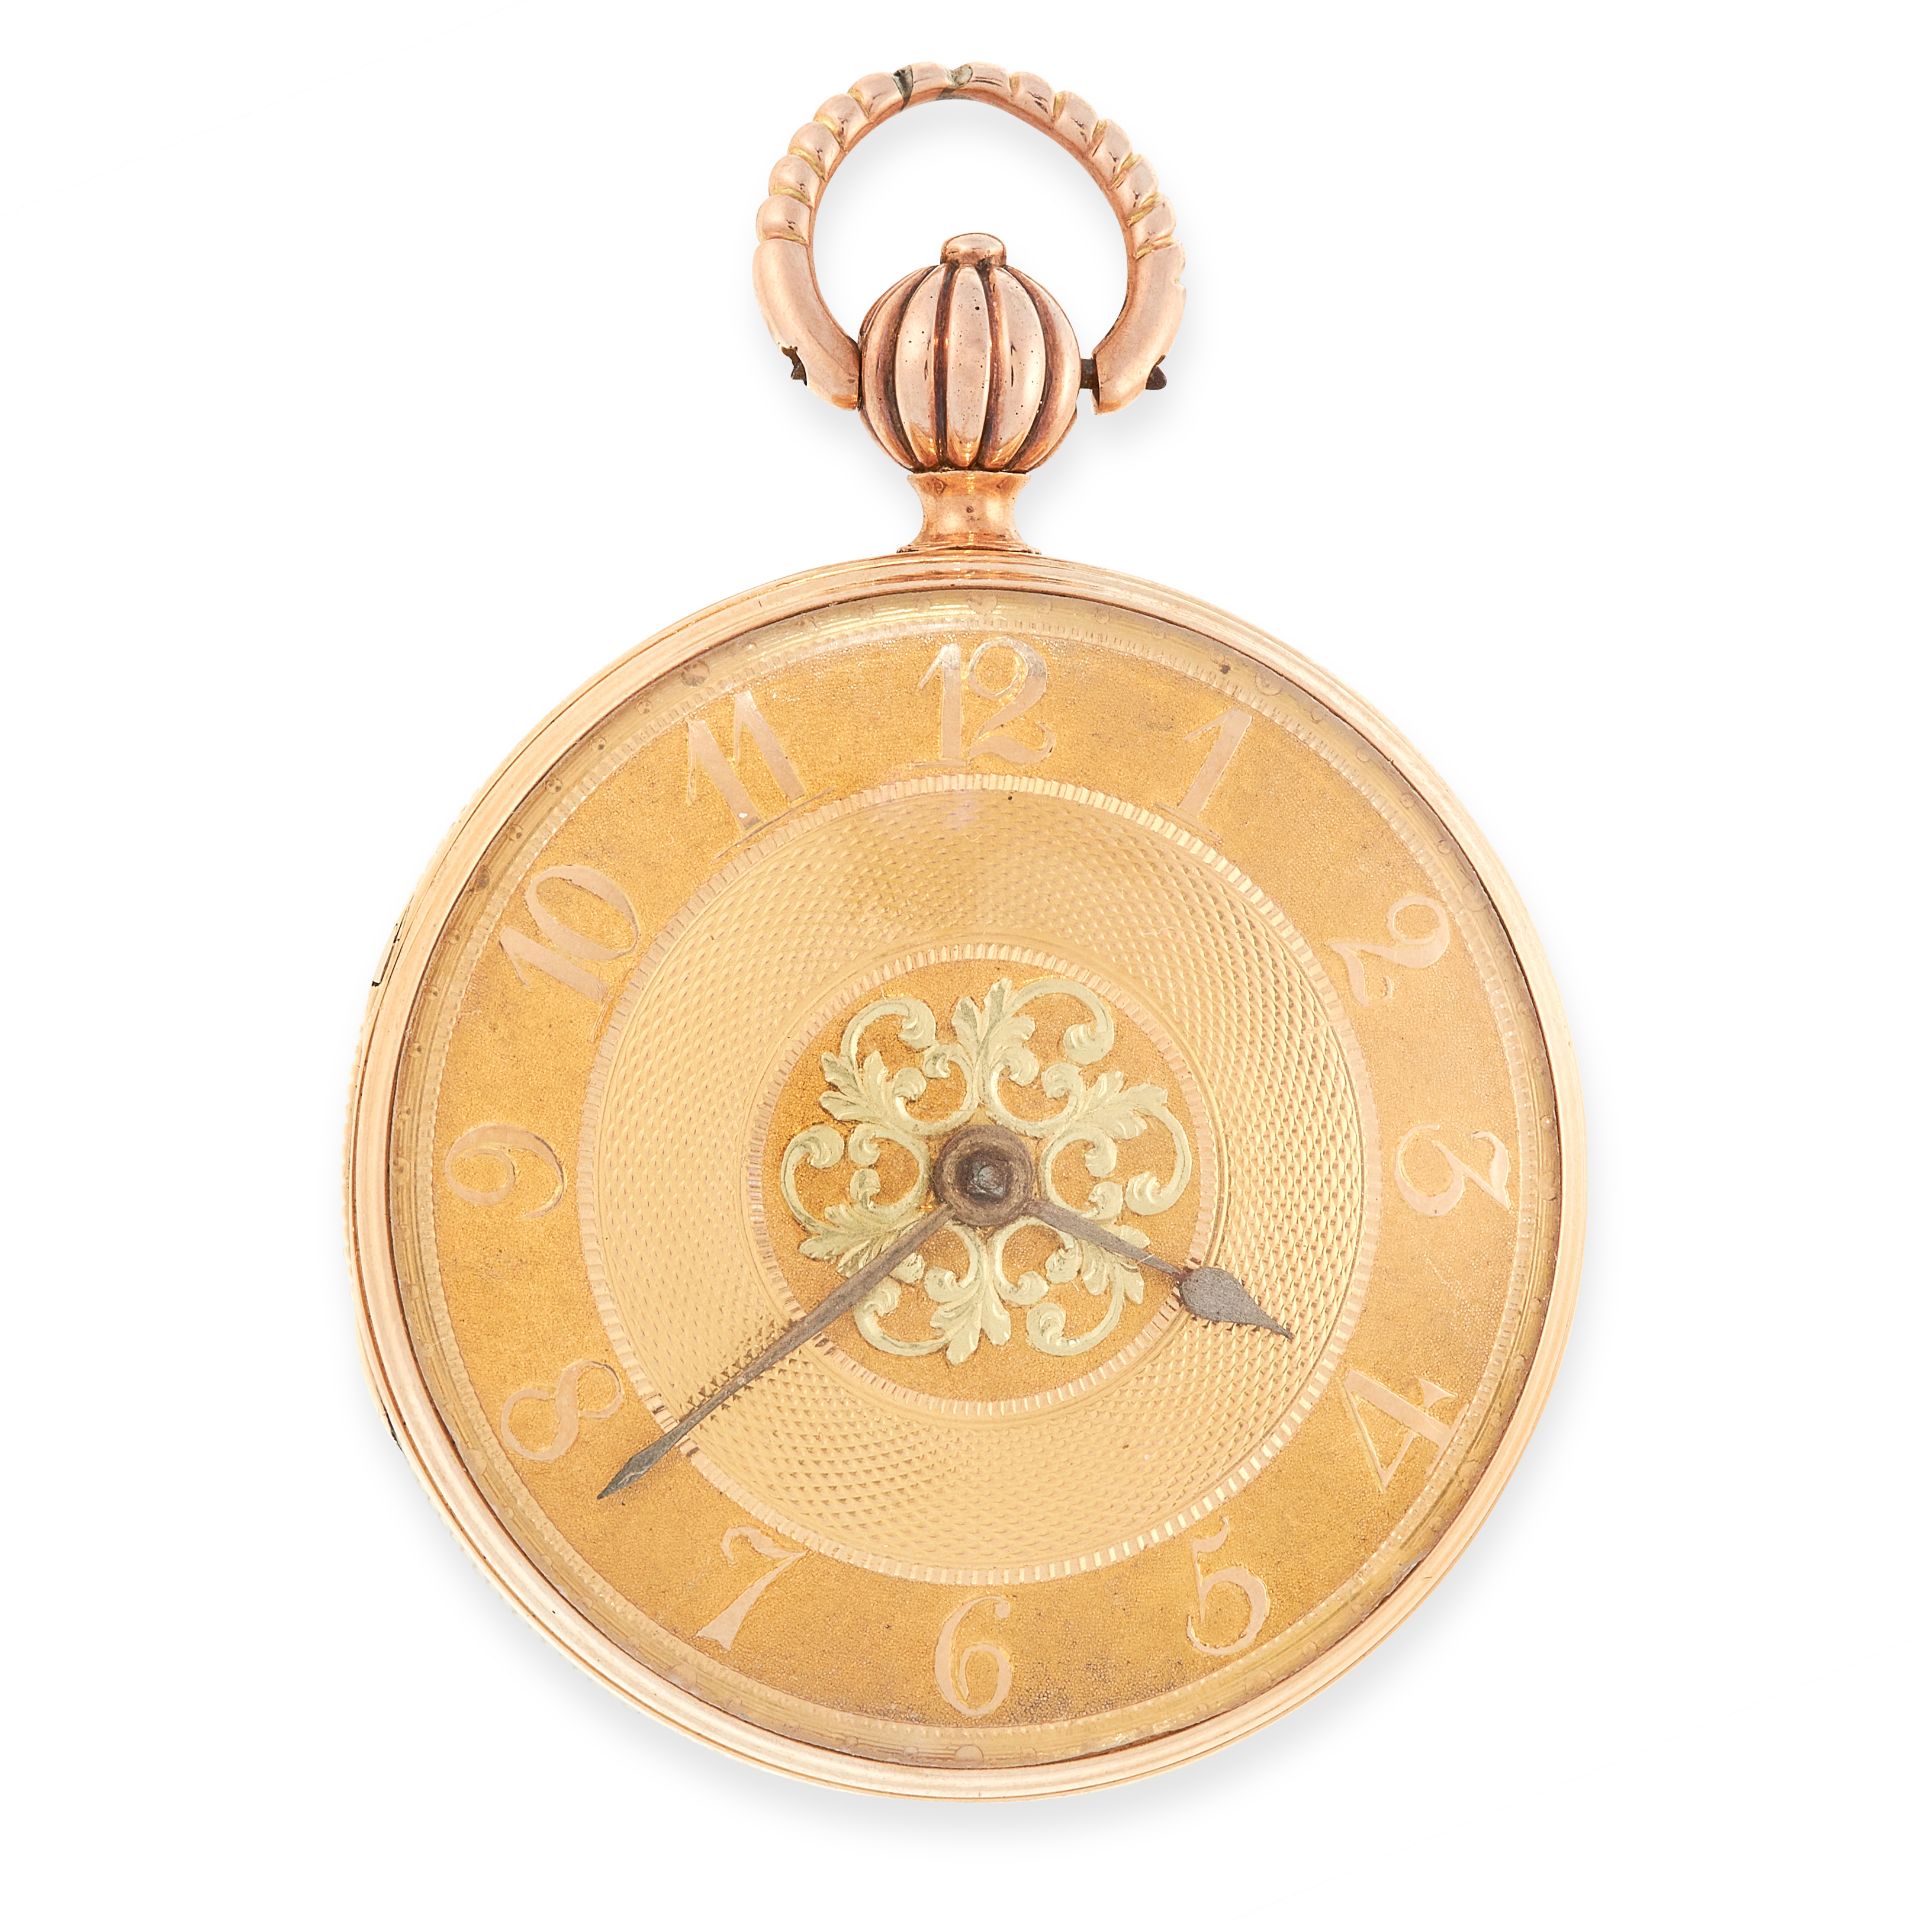 AN ANTIQUE GEORGIAN POCKET WATCH, 1812 in 18ct yellow gold, the circular body with chased foliage